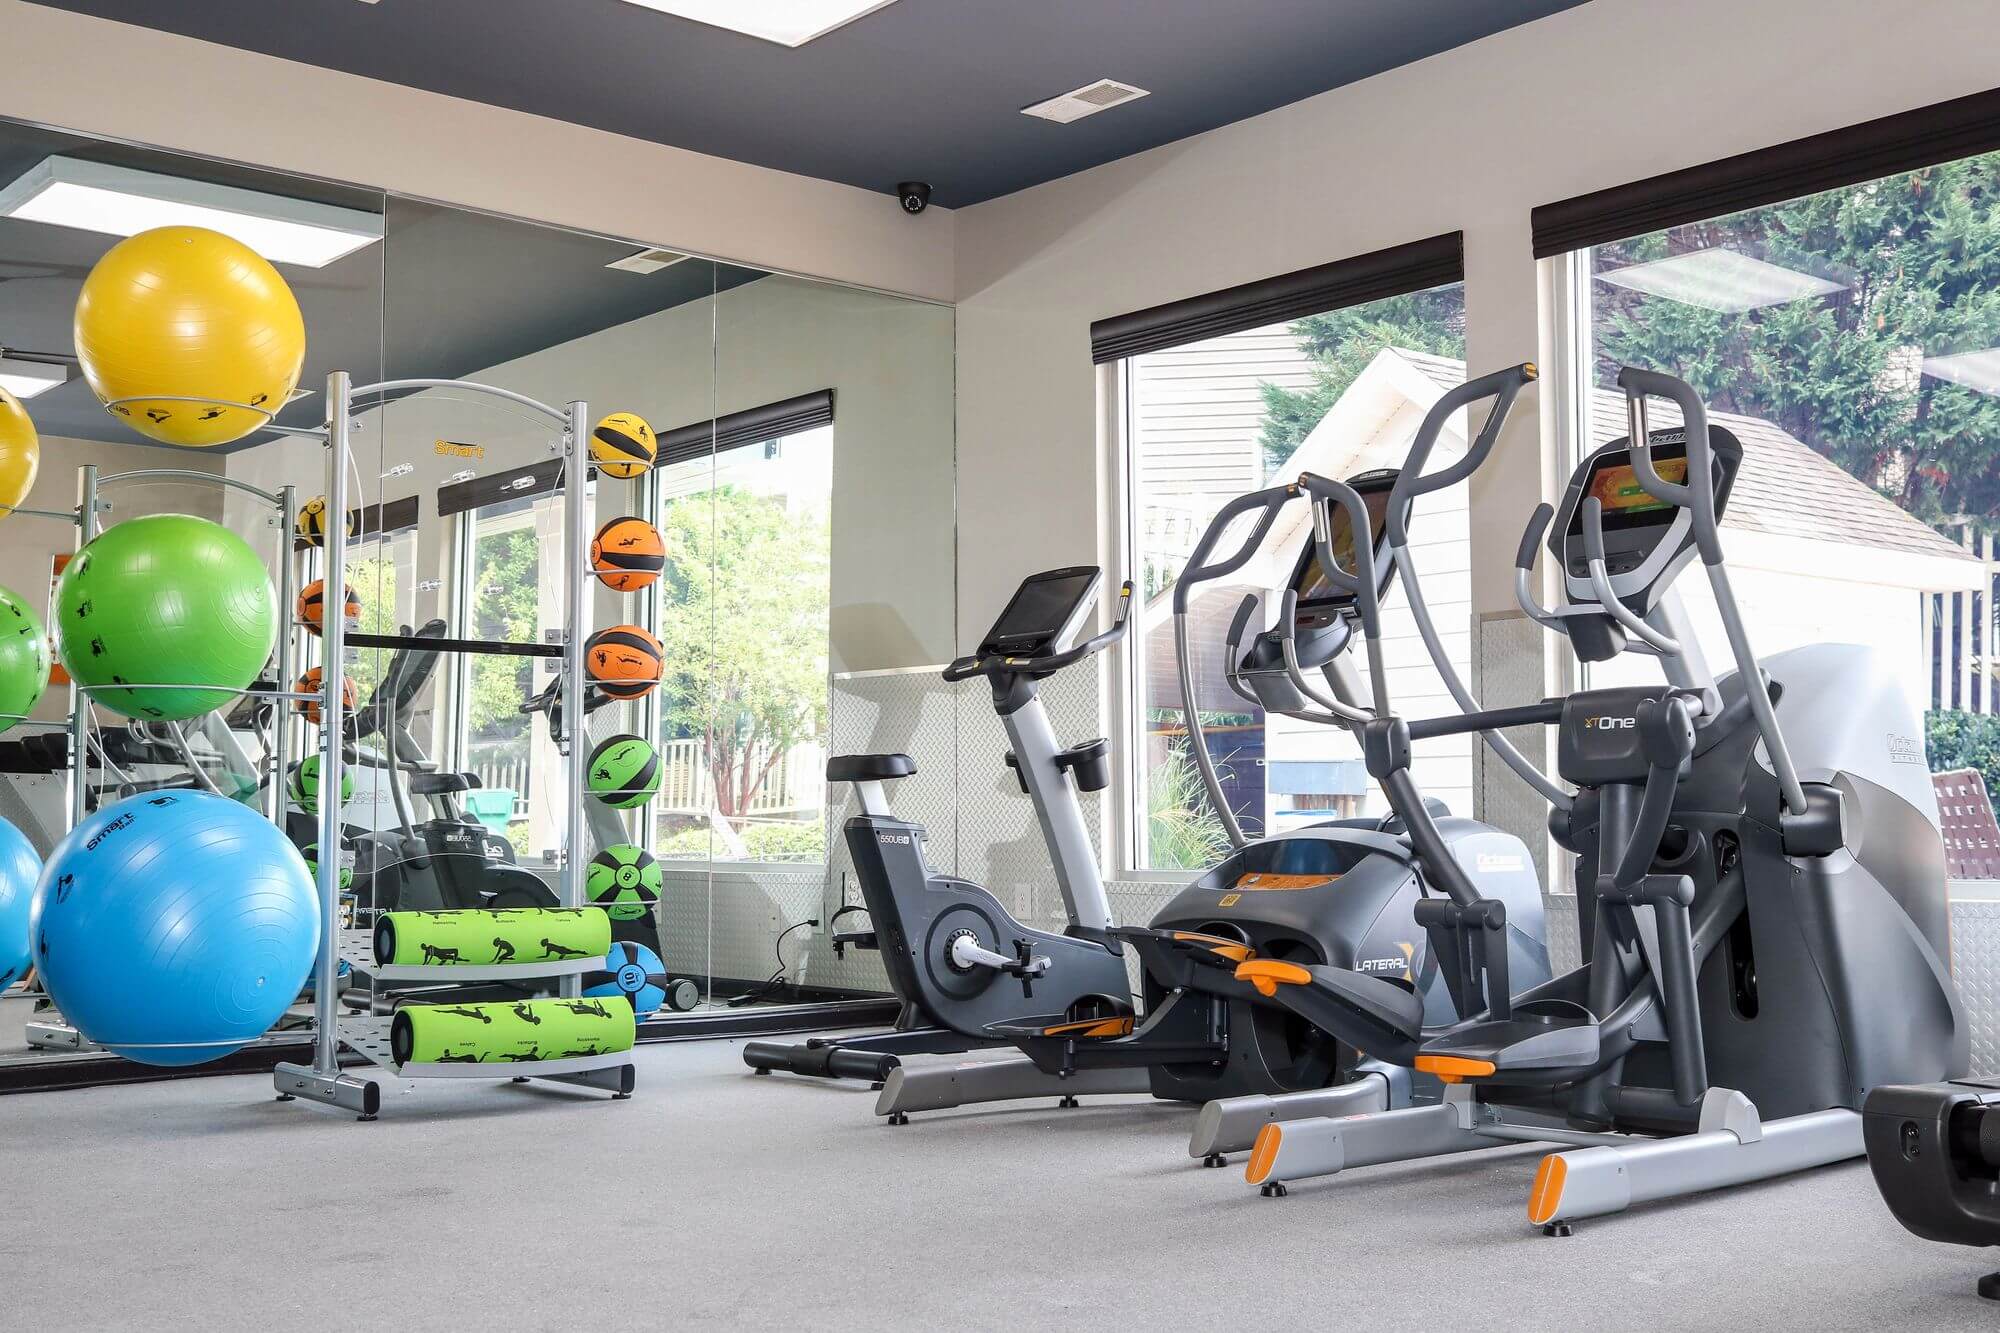 campus edge raleigh off campus apartments near nc state university resident clubhouse fitness center cardio machines medicine balls equipment